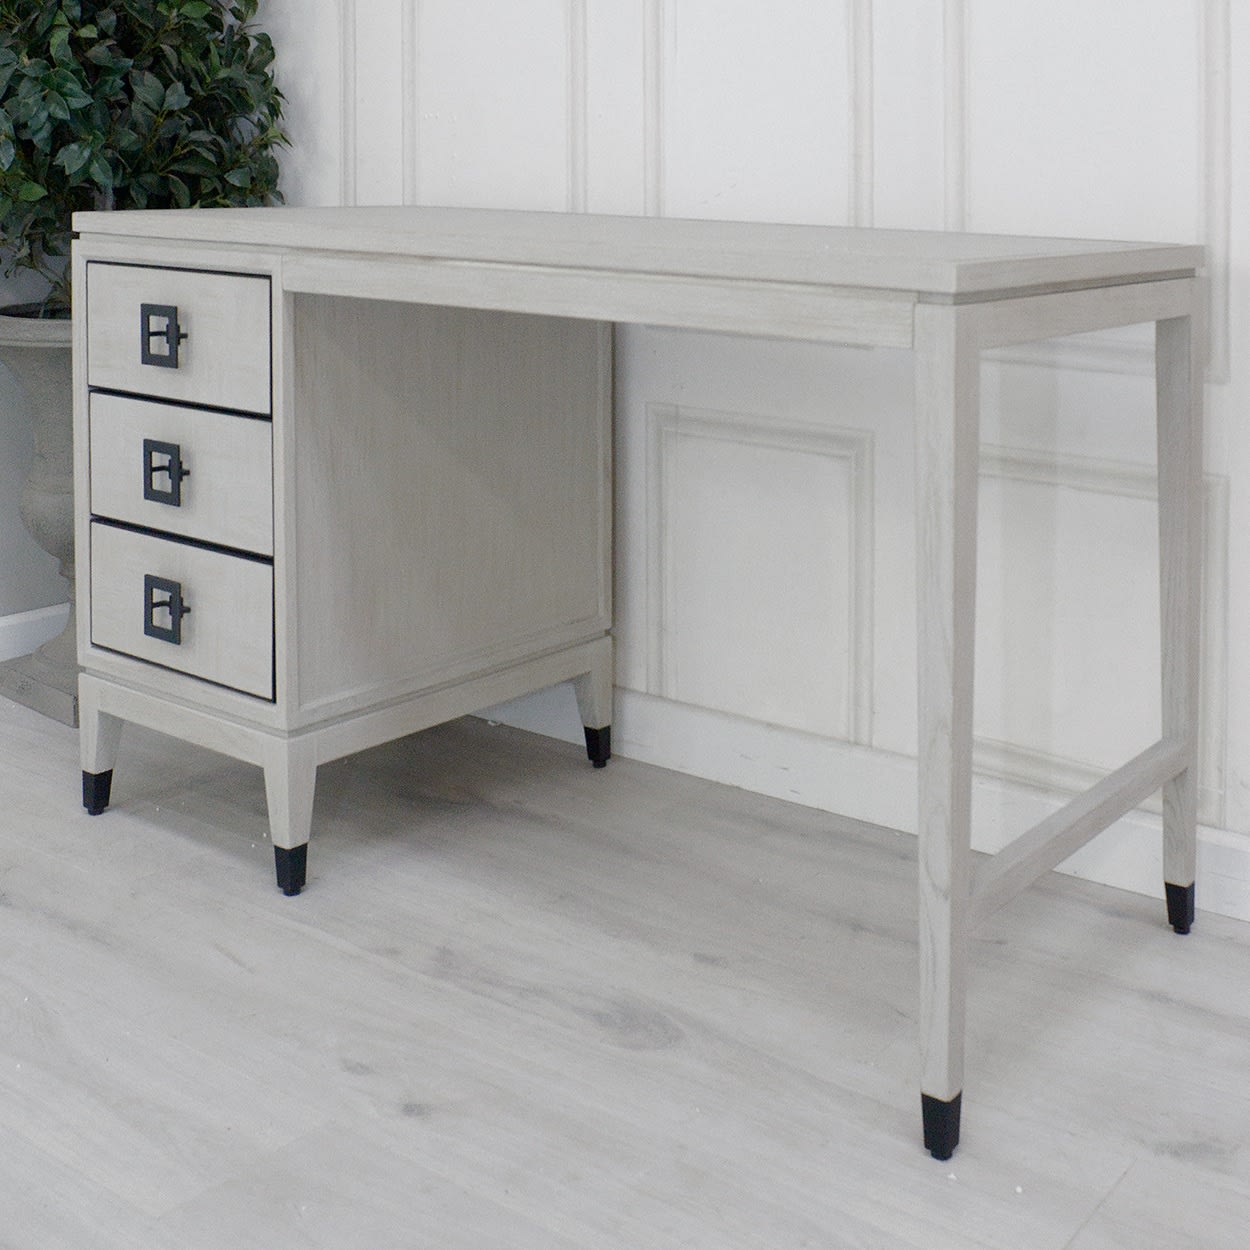 Astor Squares White Desk from the Boho Furniture Collection